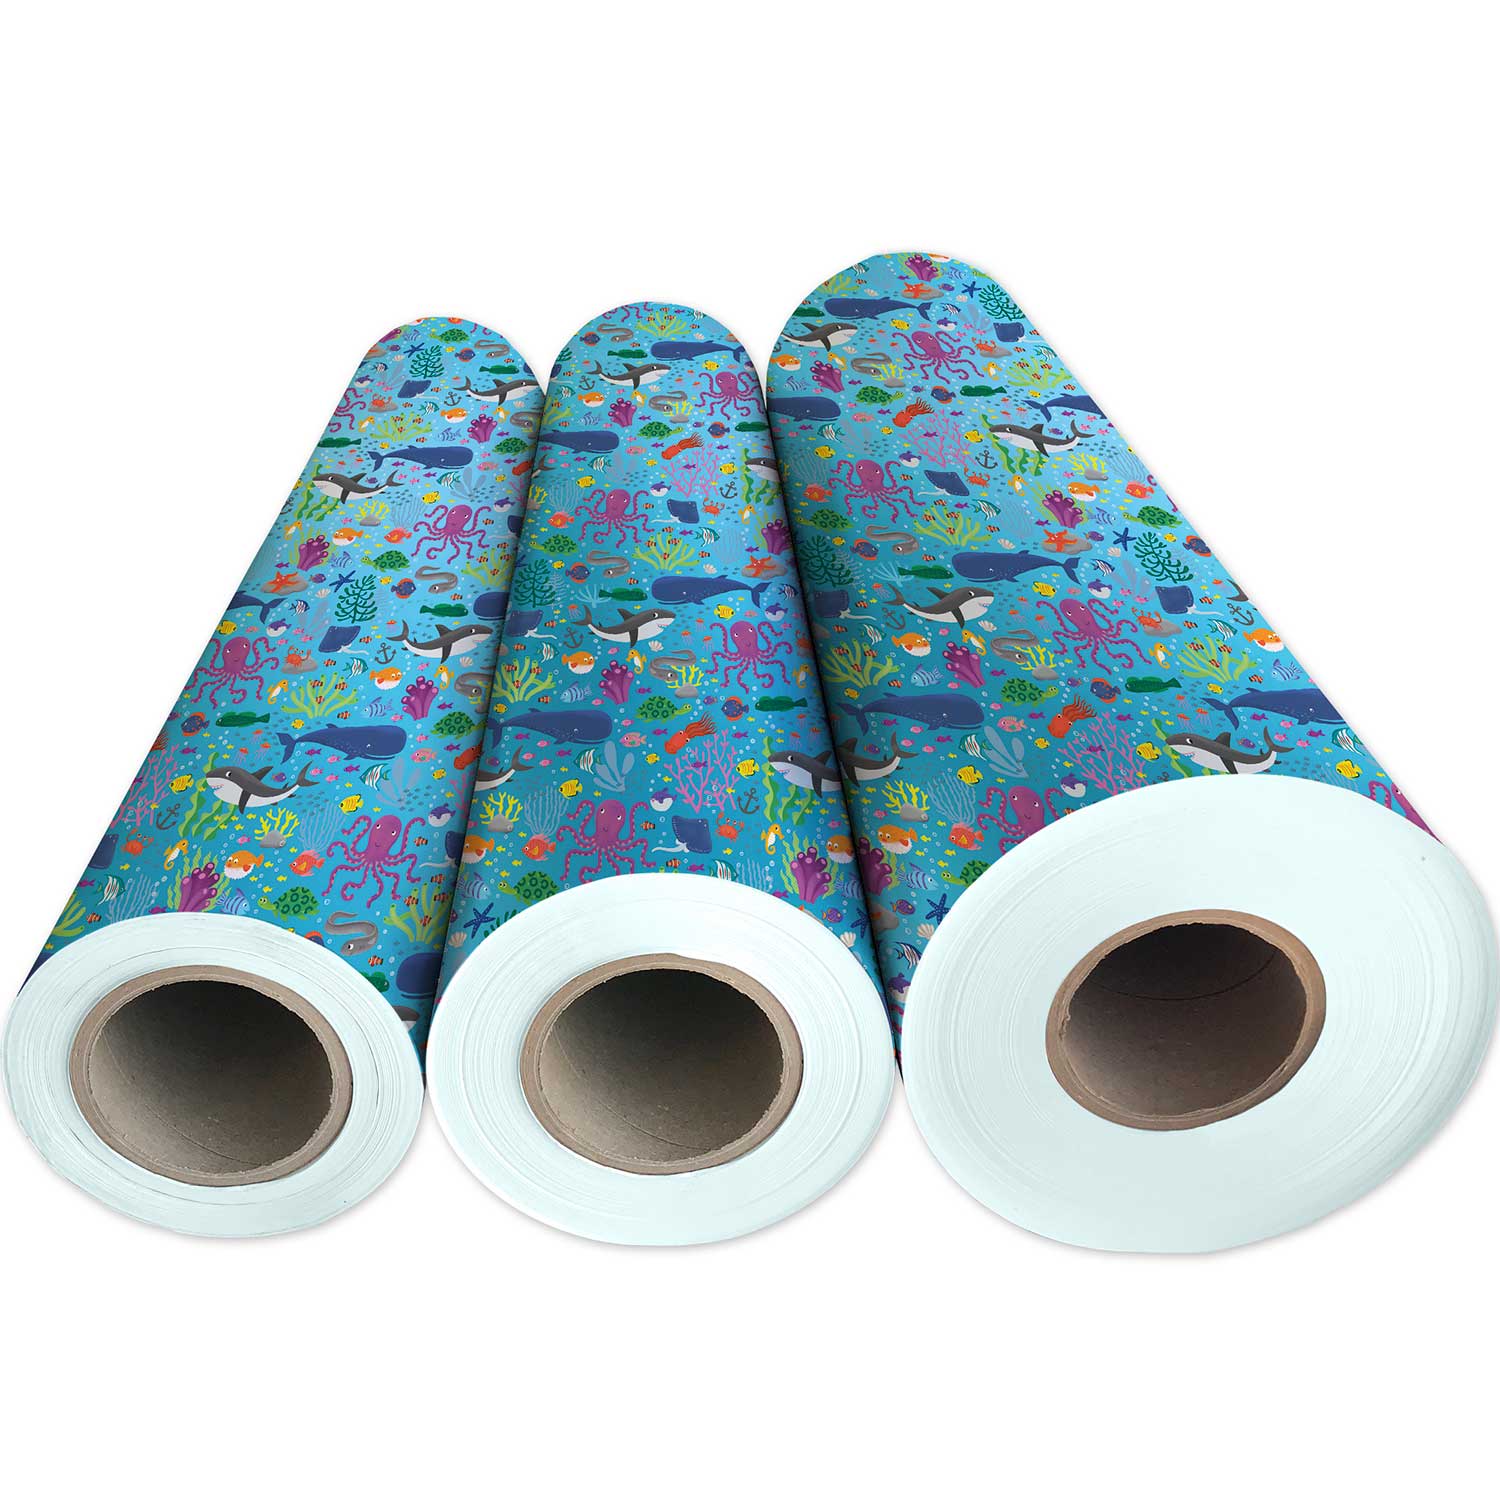 Blue Floral Wrapping Paper, 20 sq. ft.